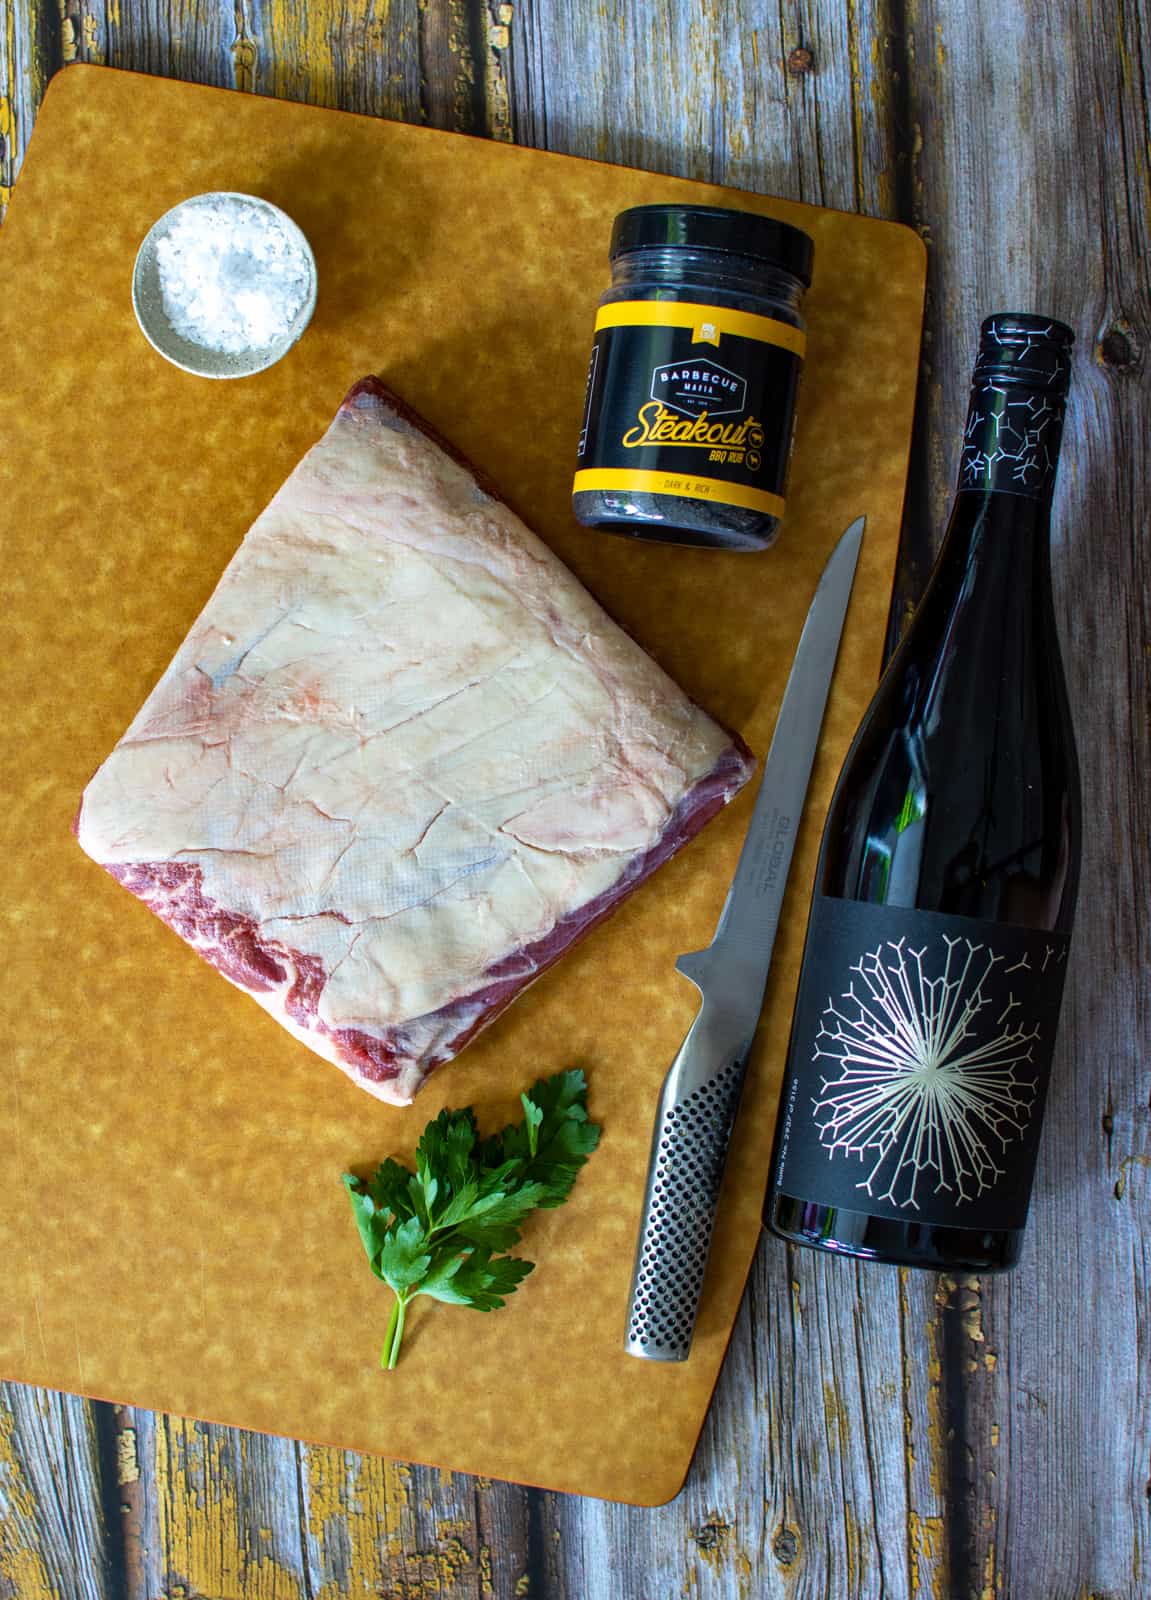 short ribs on a chopping board with barbecue madia rub and a bottle of dandelion wine